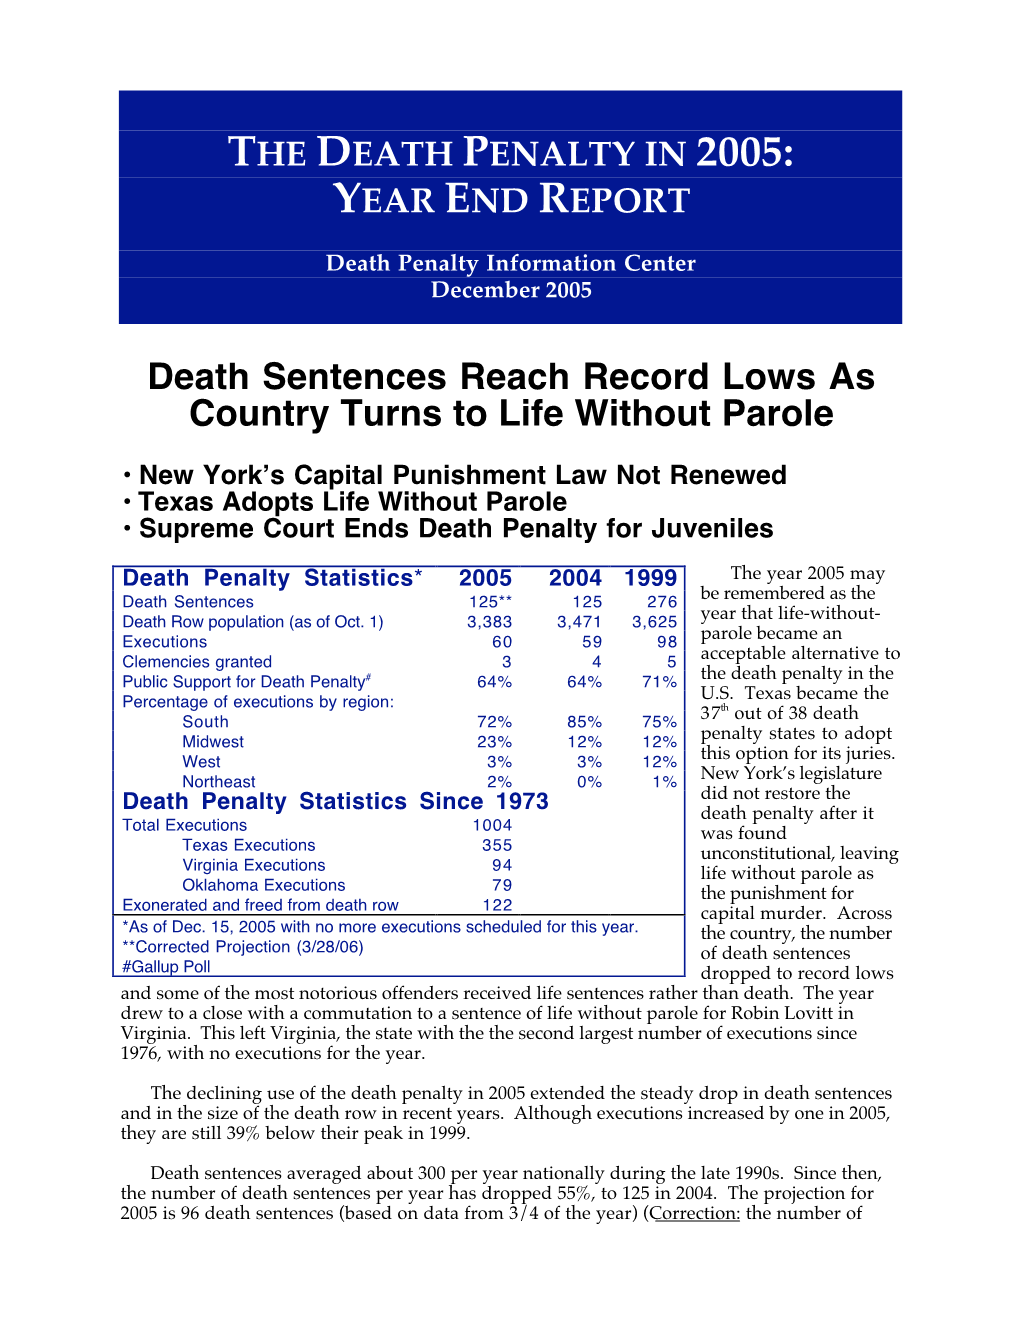 Death Sentences Reach Record Lows As Country Turns to Life Without Parole